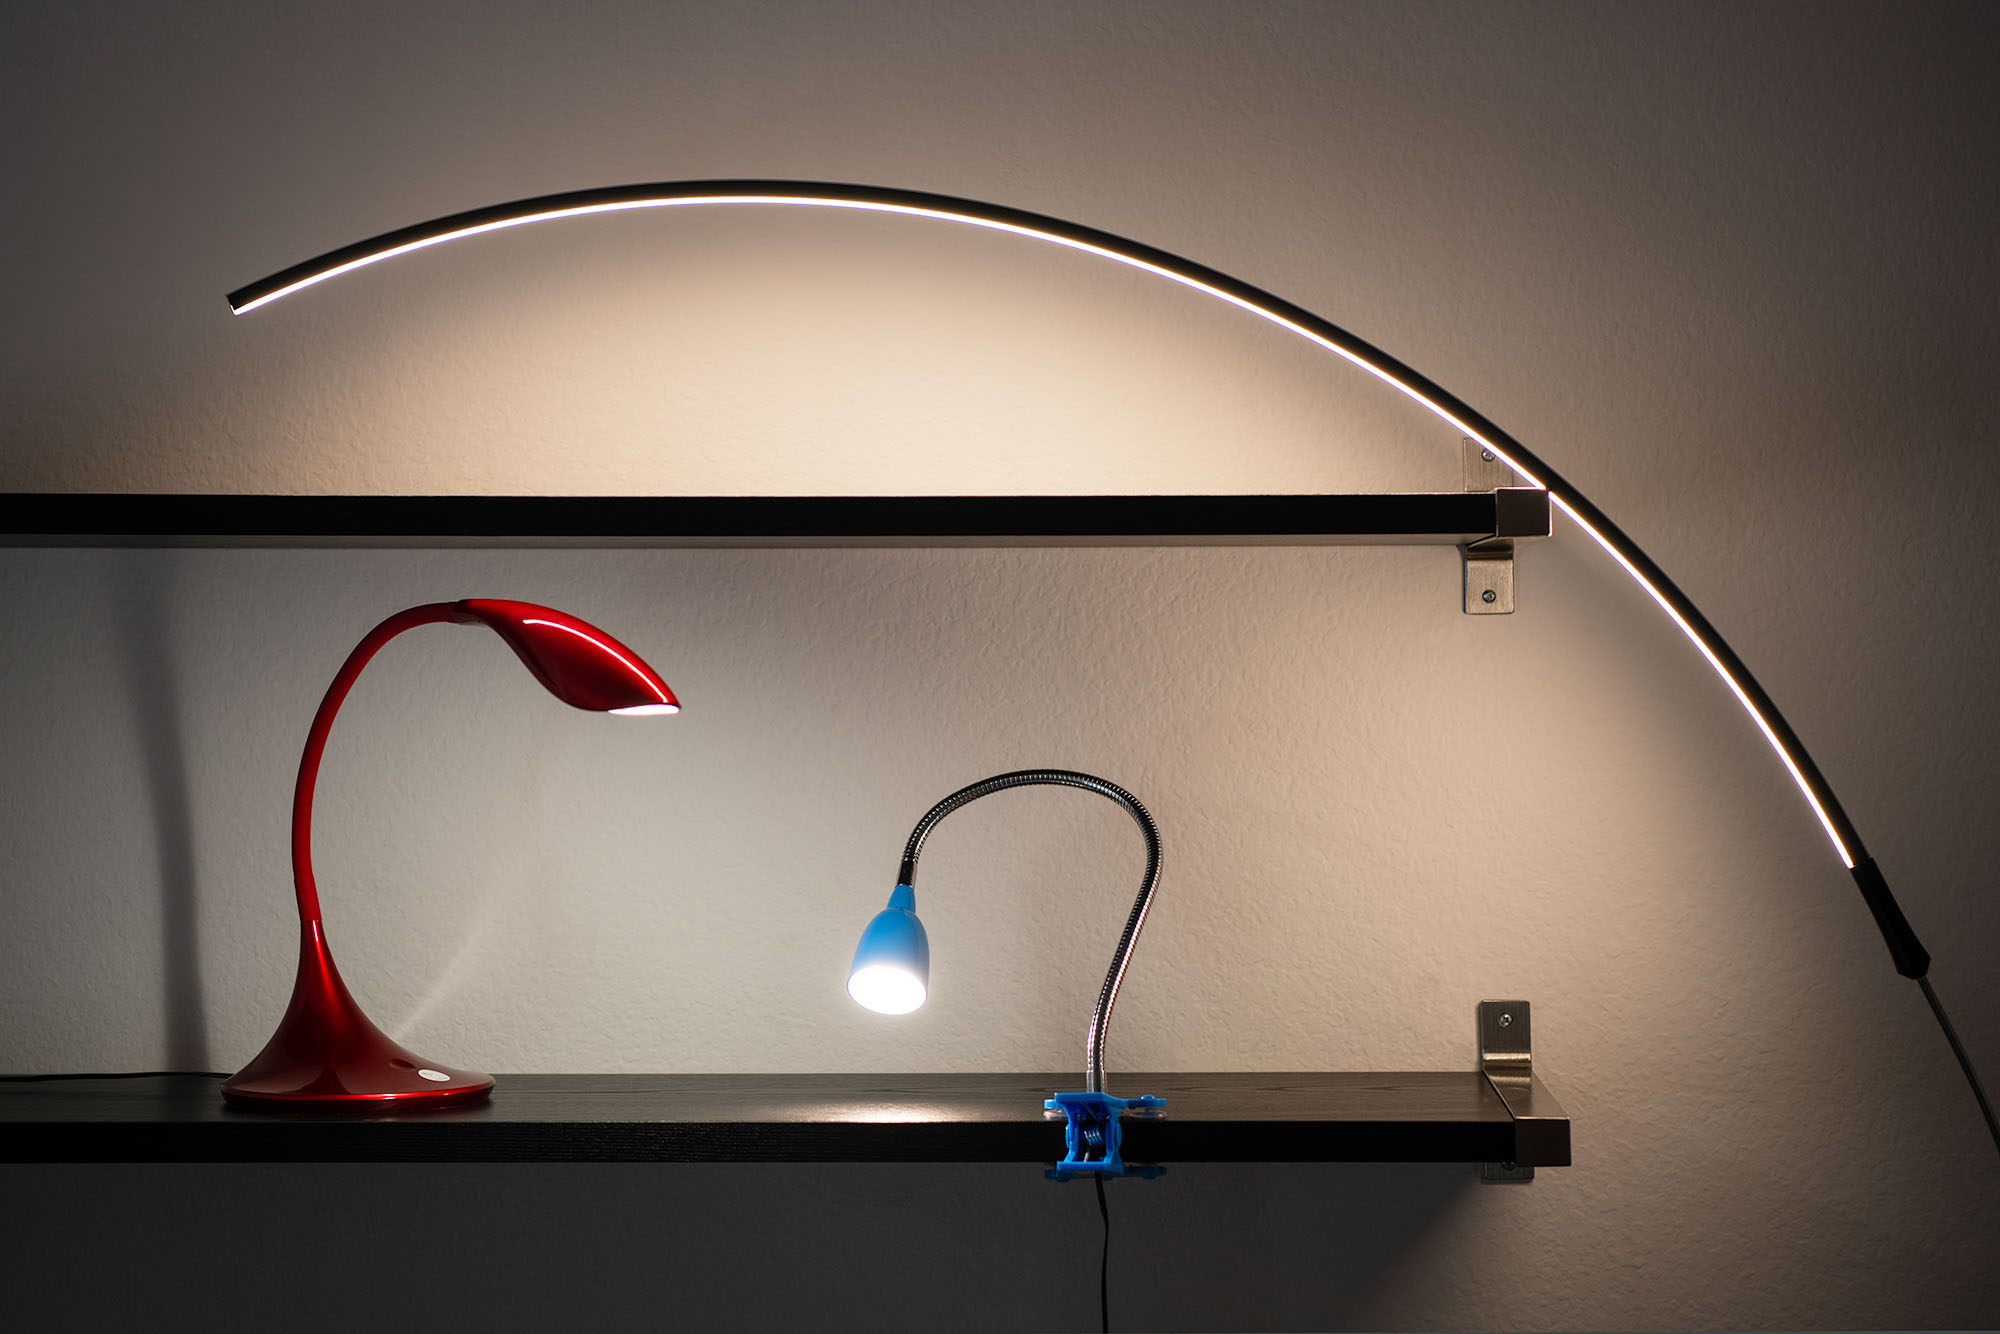 The Best Reading Lamps for Desks, Beds, and Floors - Reviews by YBD